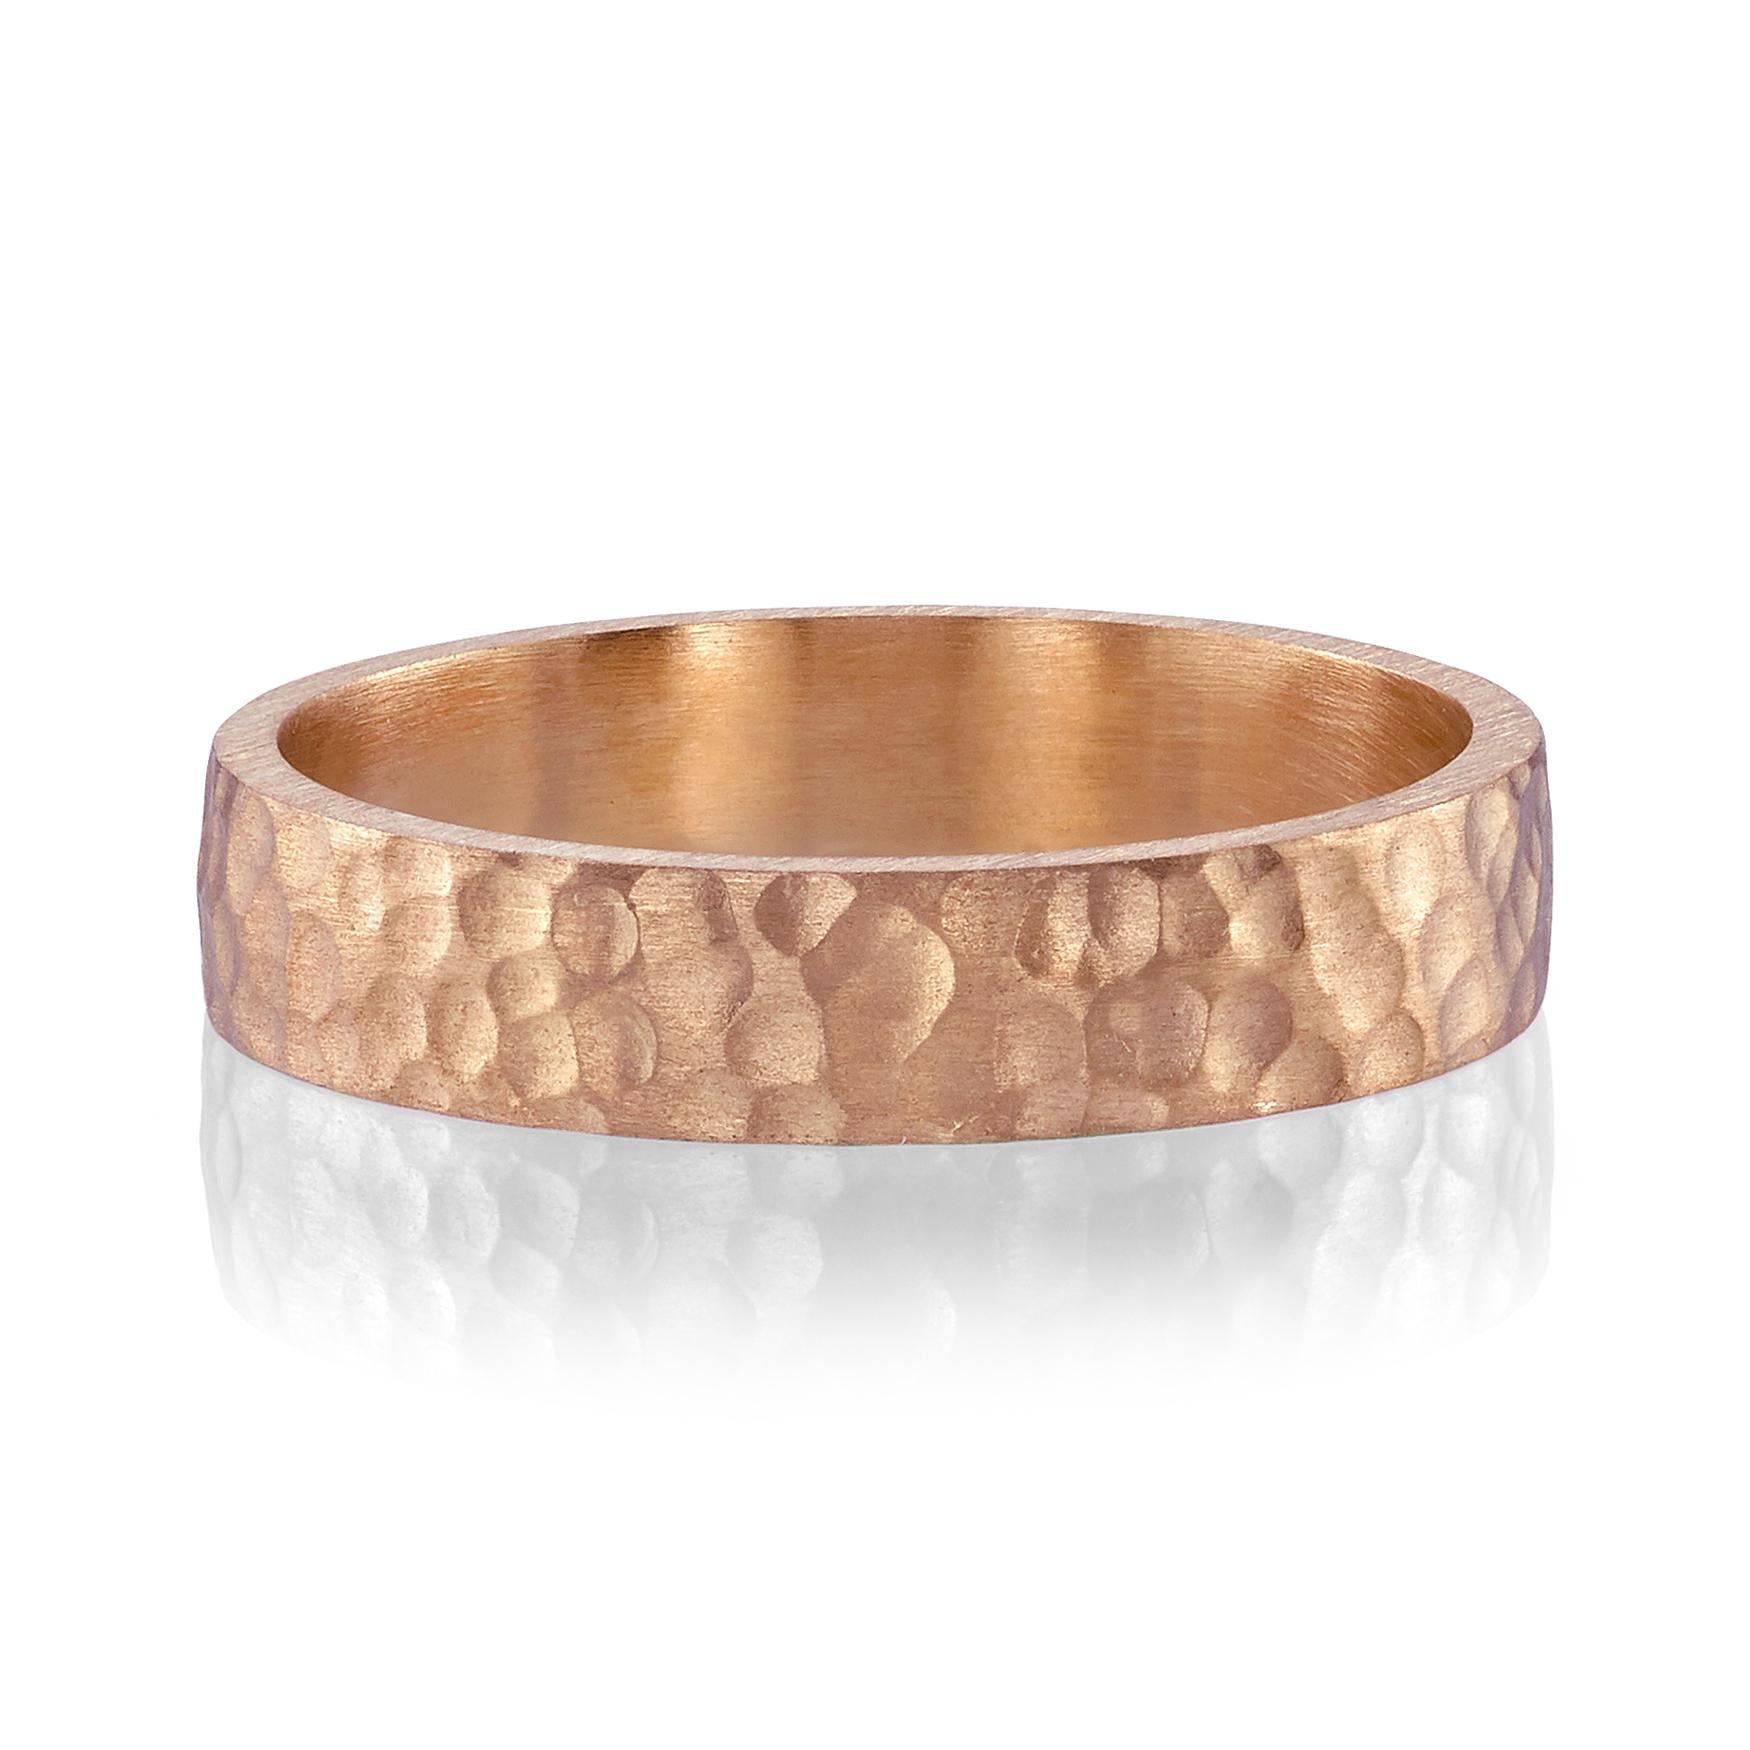 5mm handcrafted 18k gold men's band with a hand hammered finish. Band widths available from 2mm to 12mm. 

Our jewelry is made locally in Los Angeles and most pieces are made to order. For these made-to-order items, please allow 8-10 weeks for